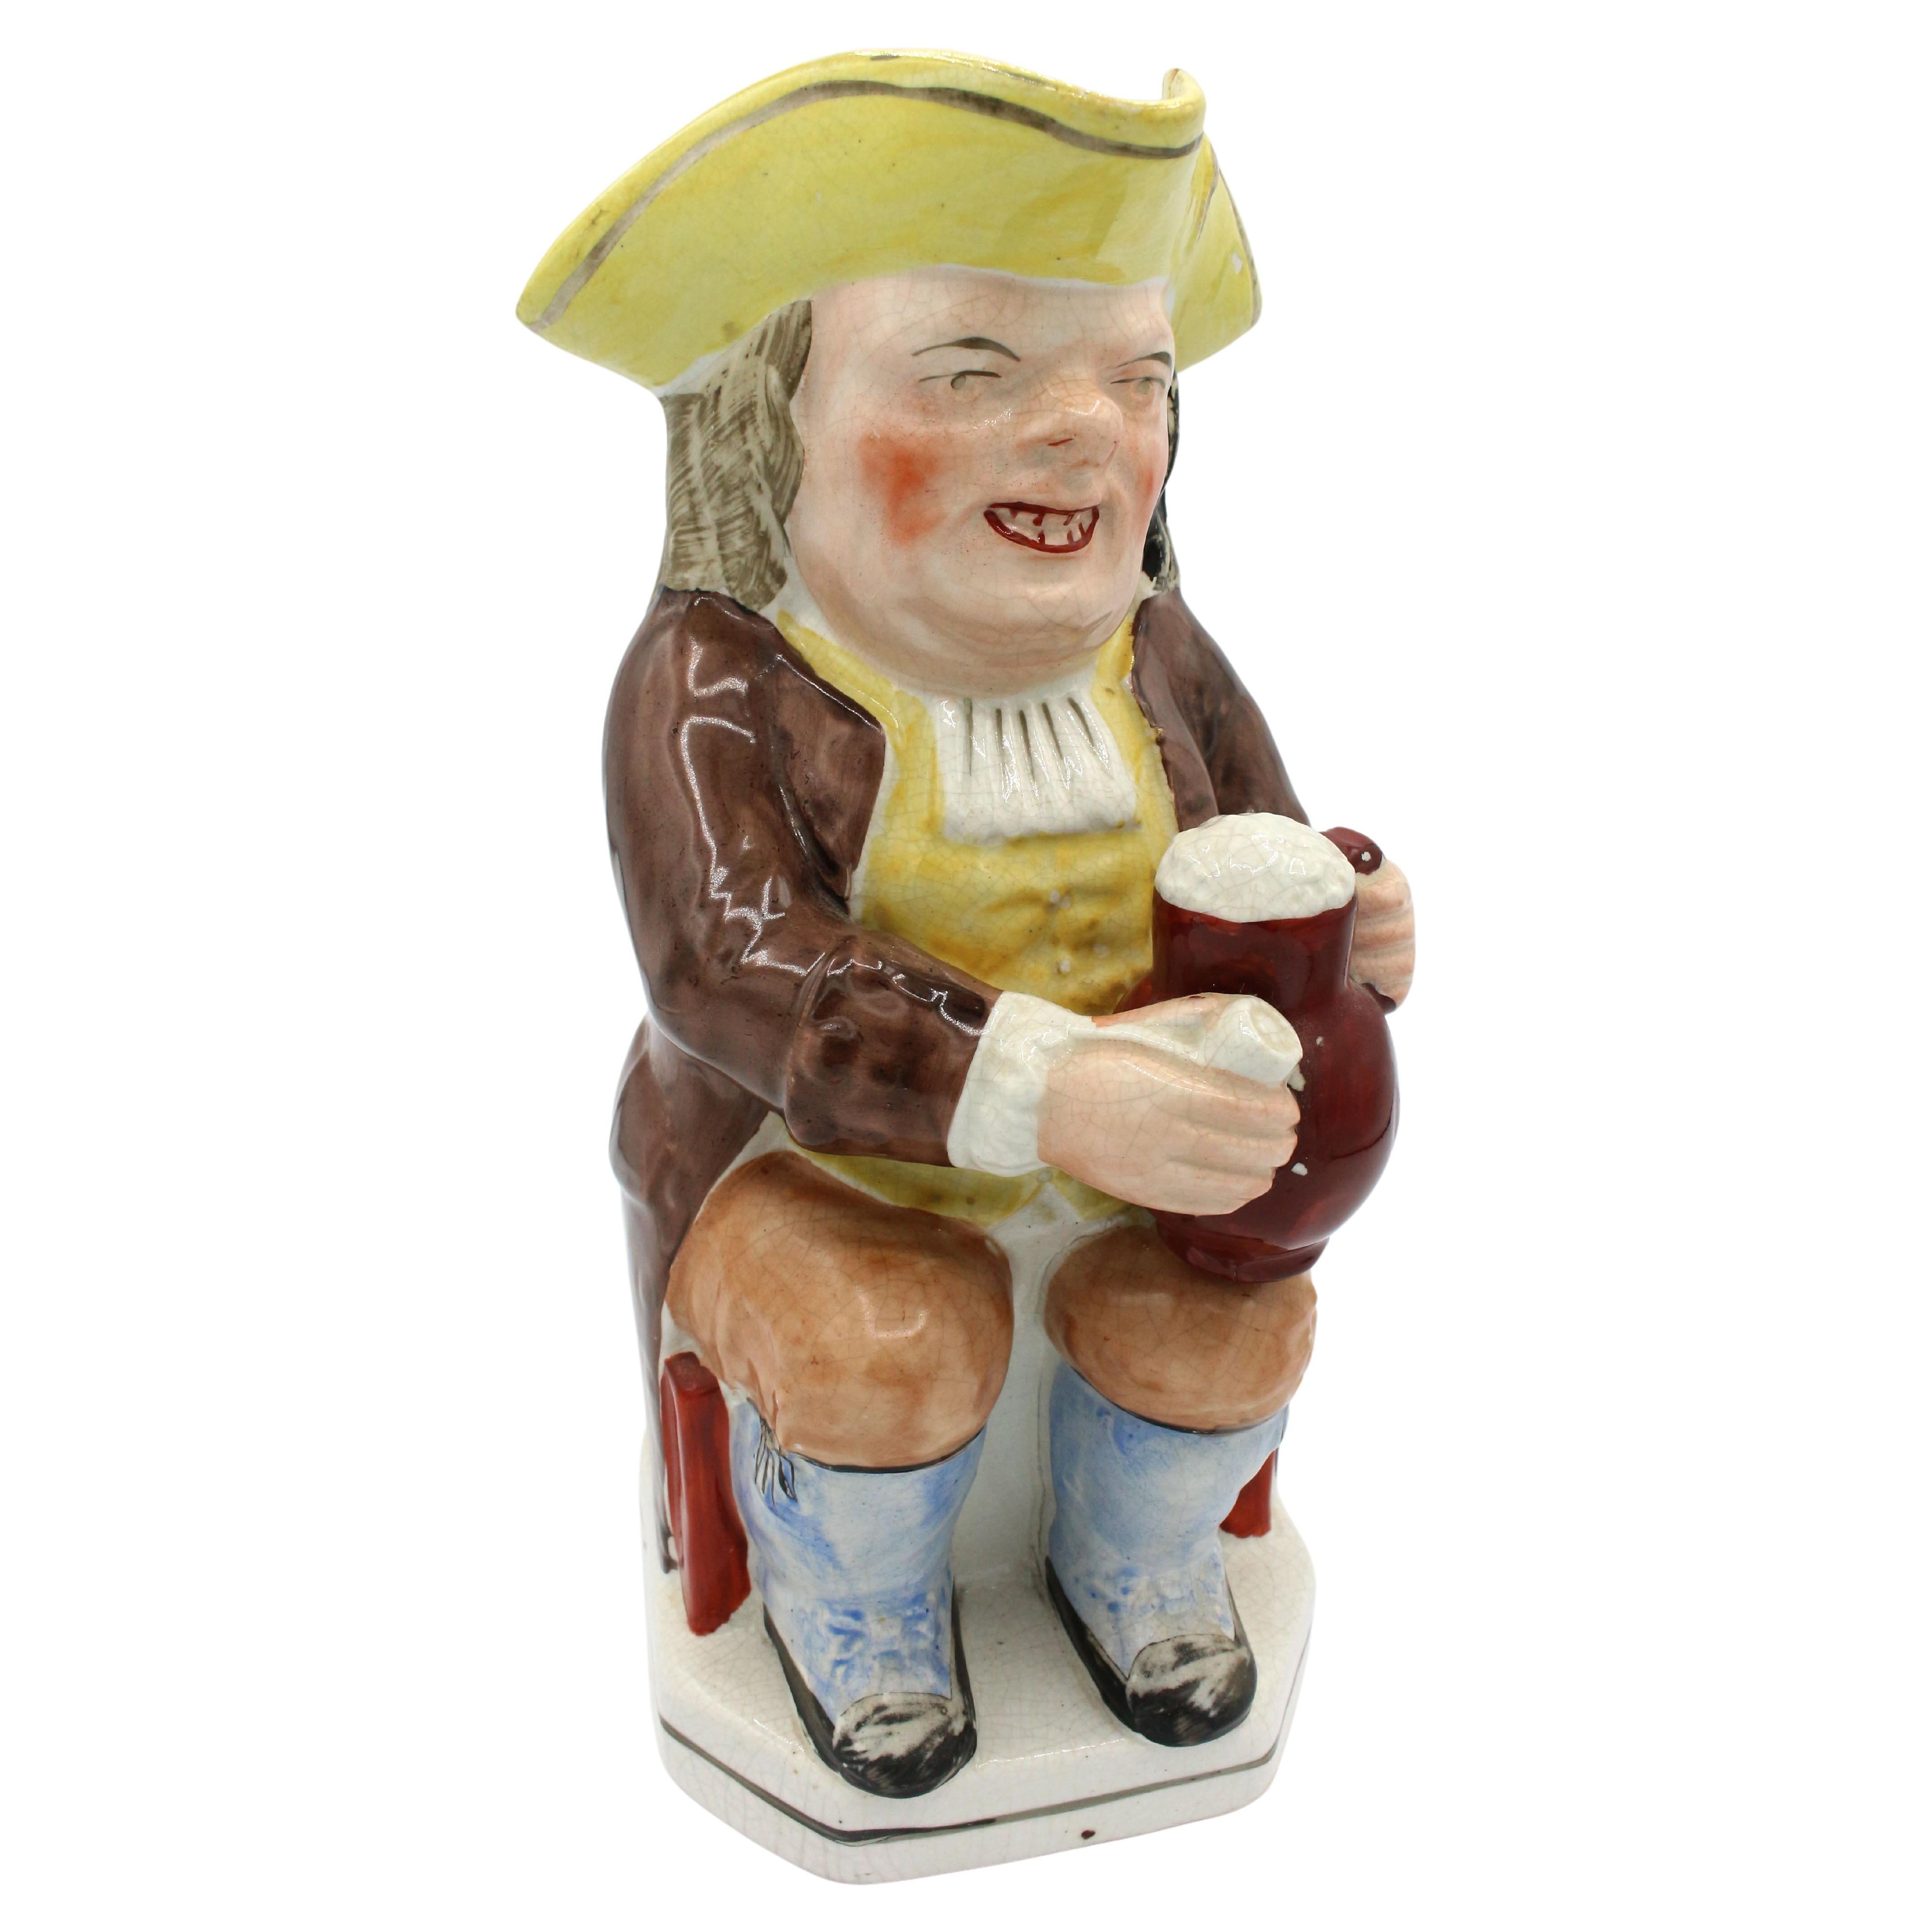 What is a Toby jug worth?